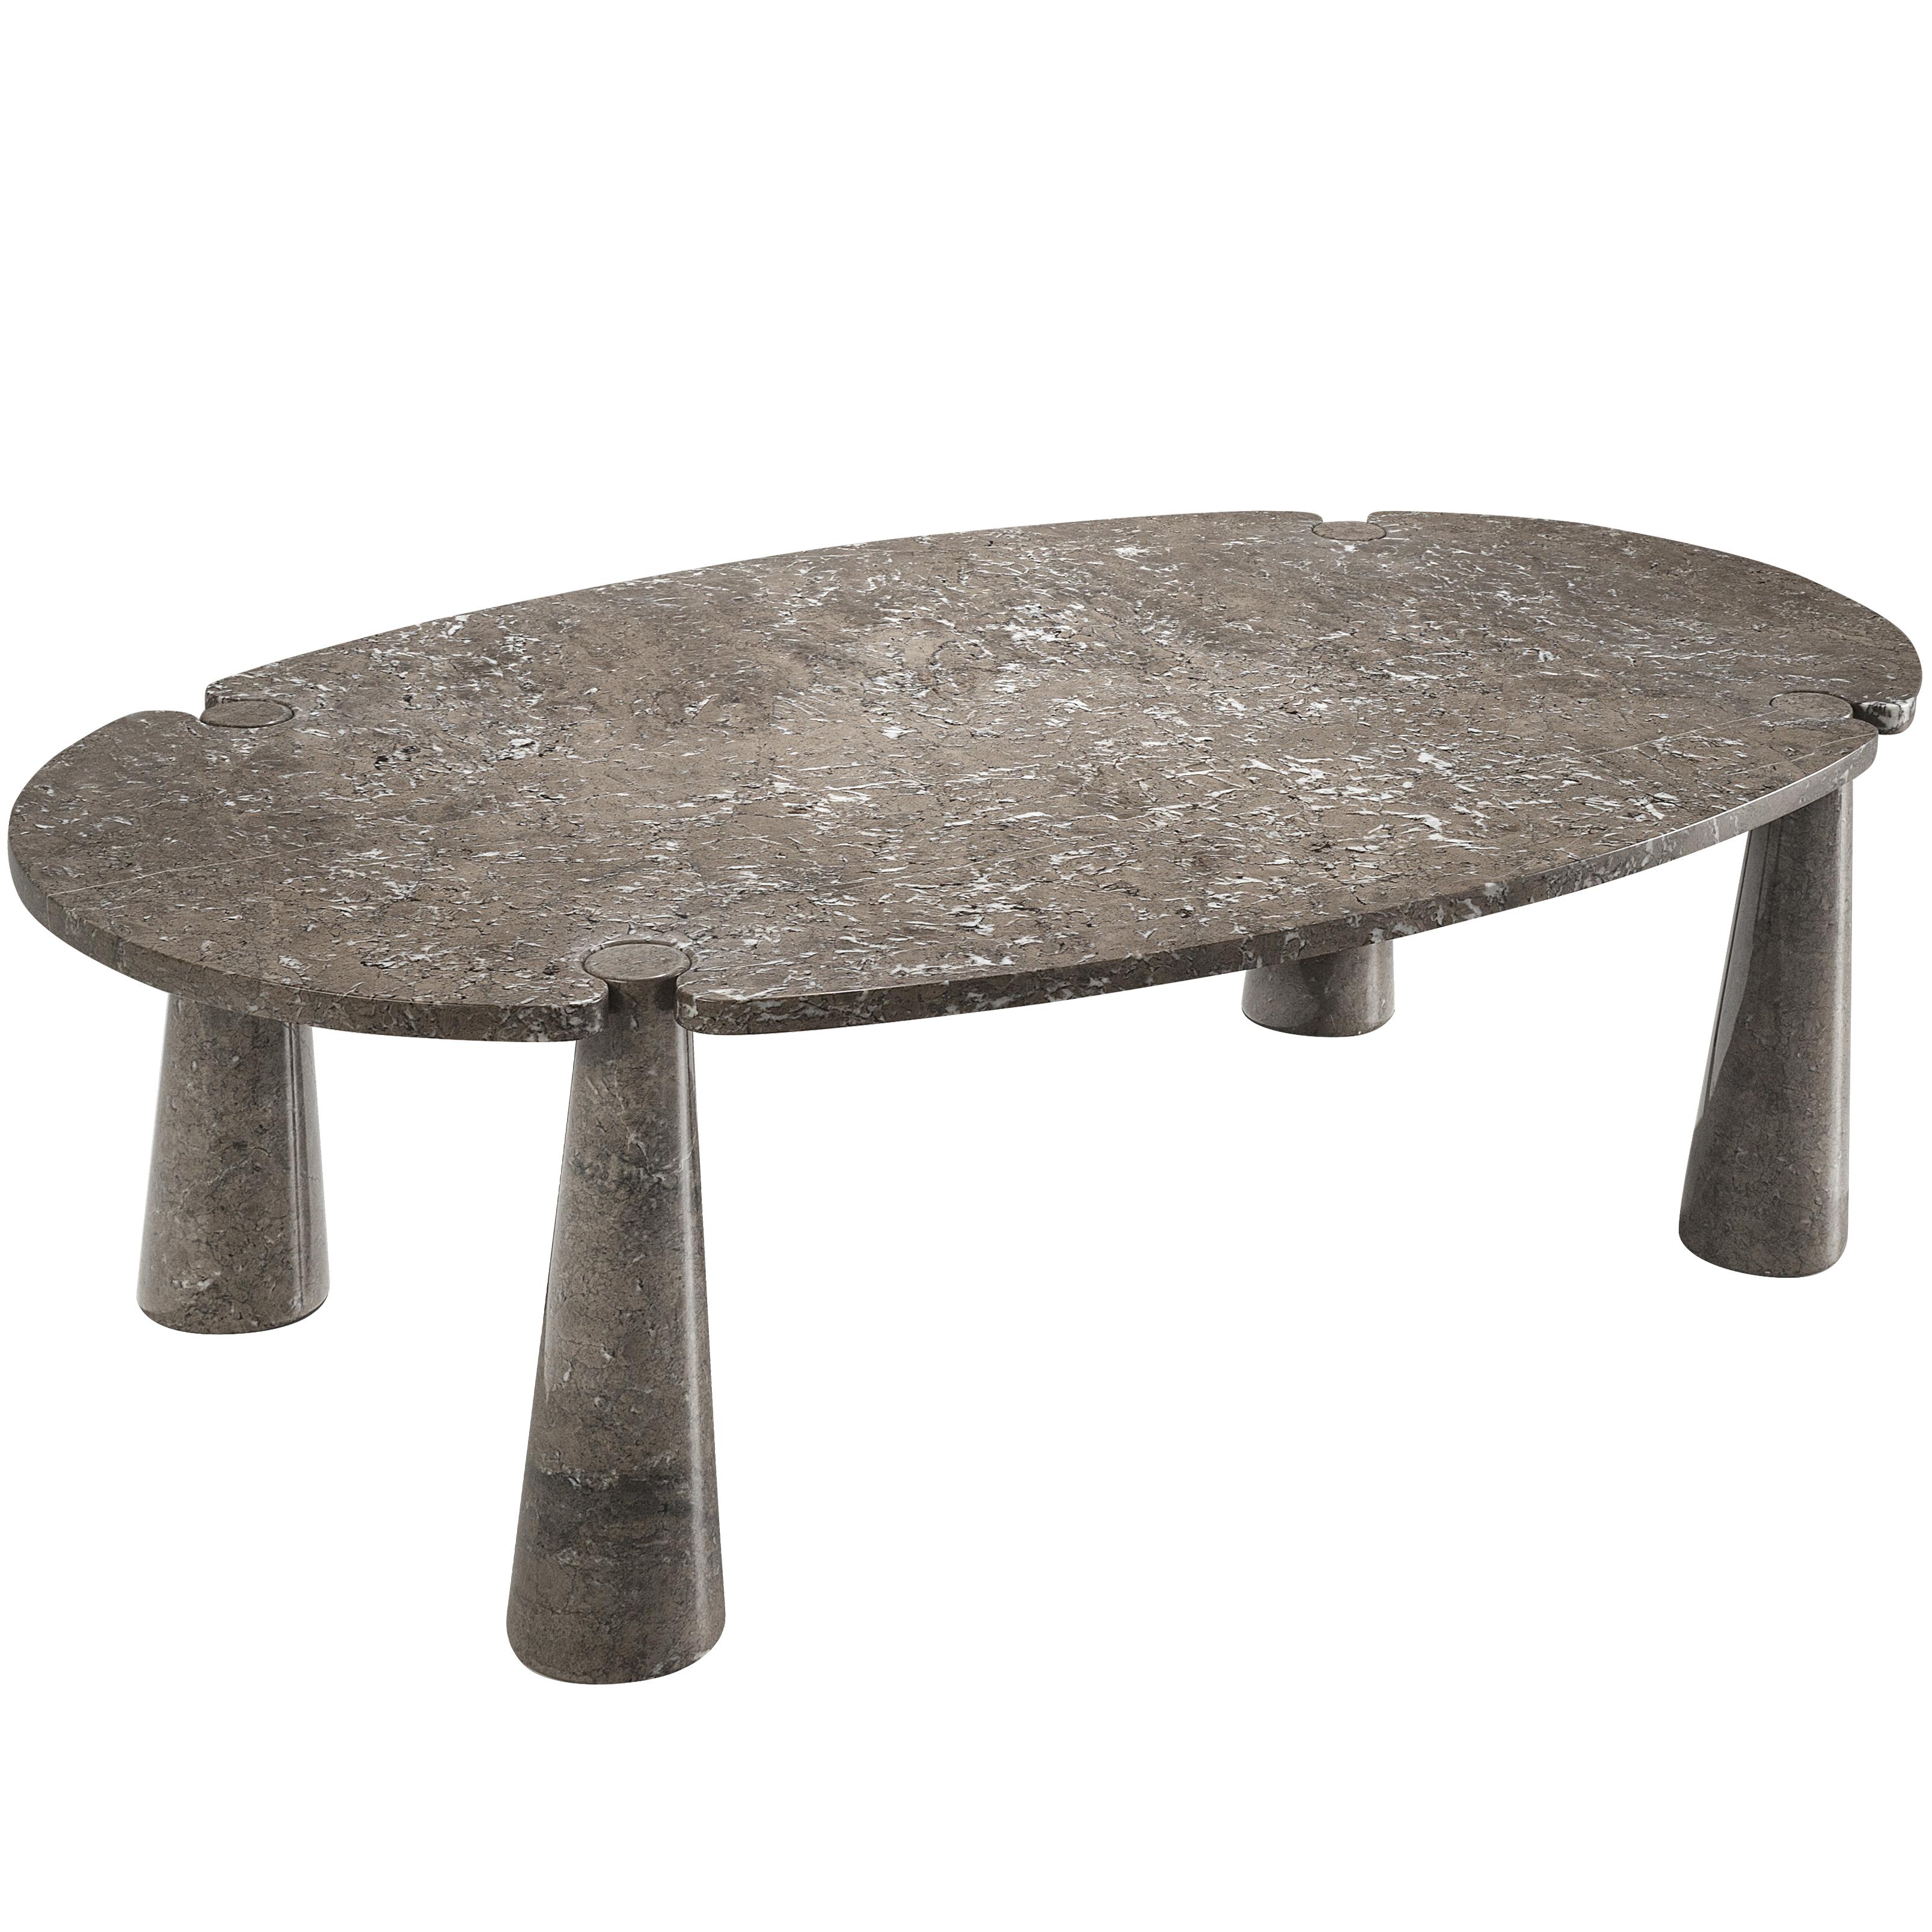 Angelo Mangiarotti 'Eros' Dining Table in Marble